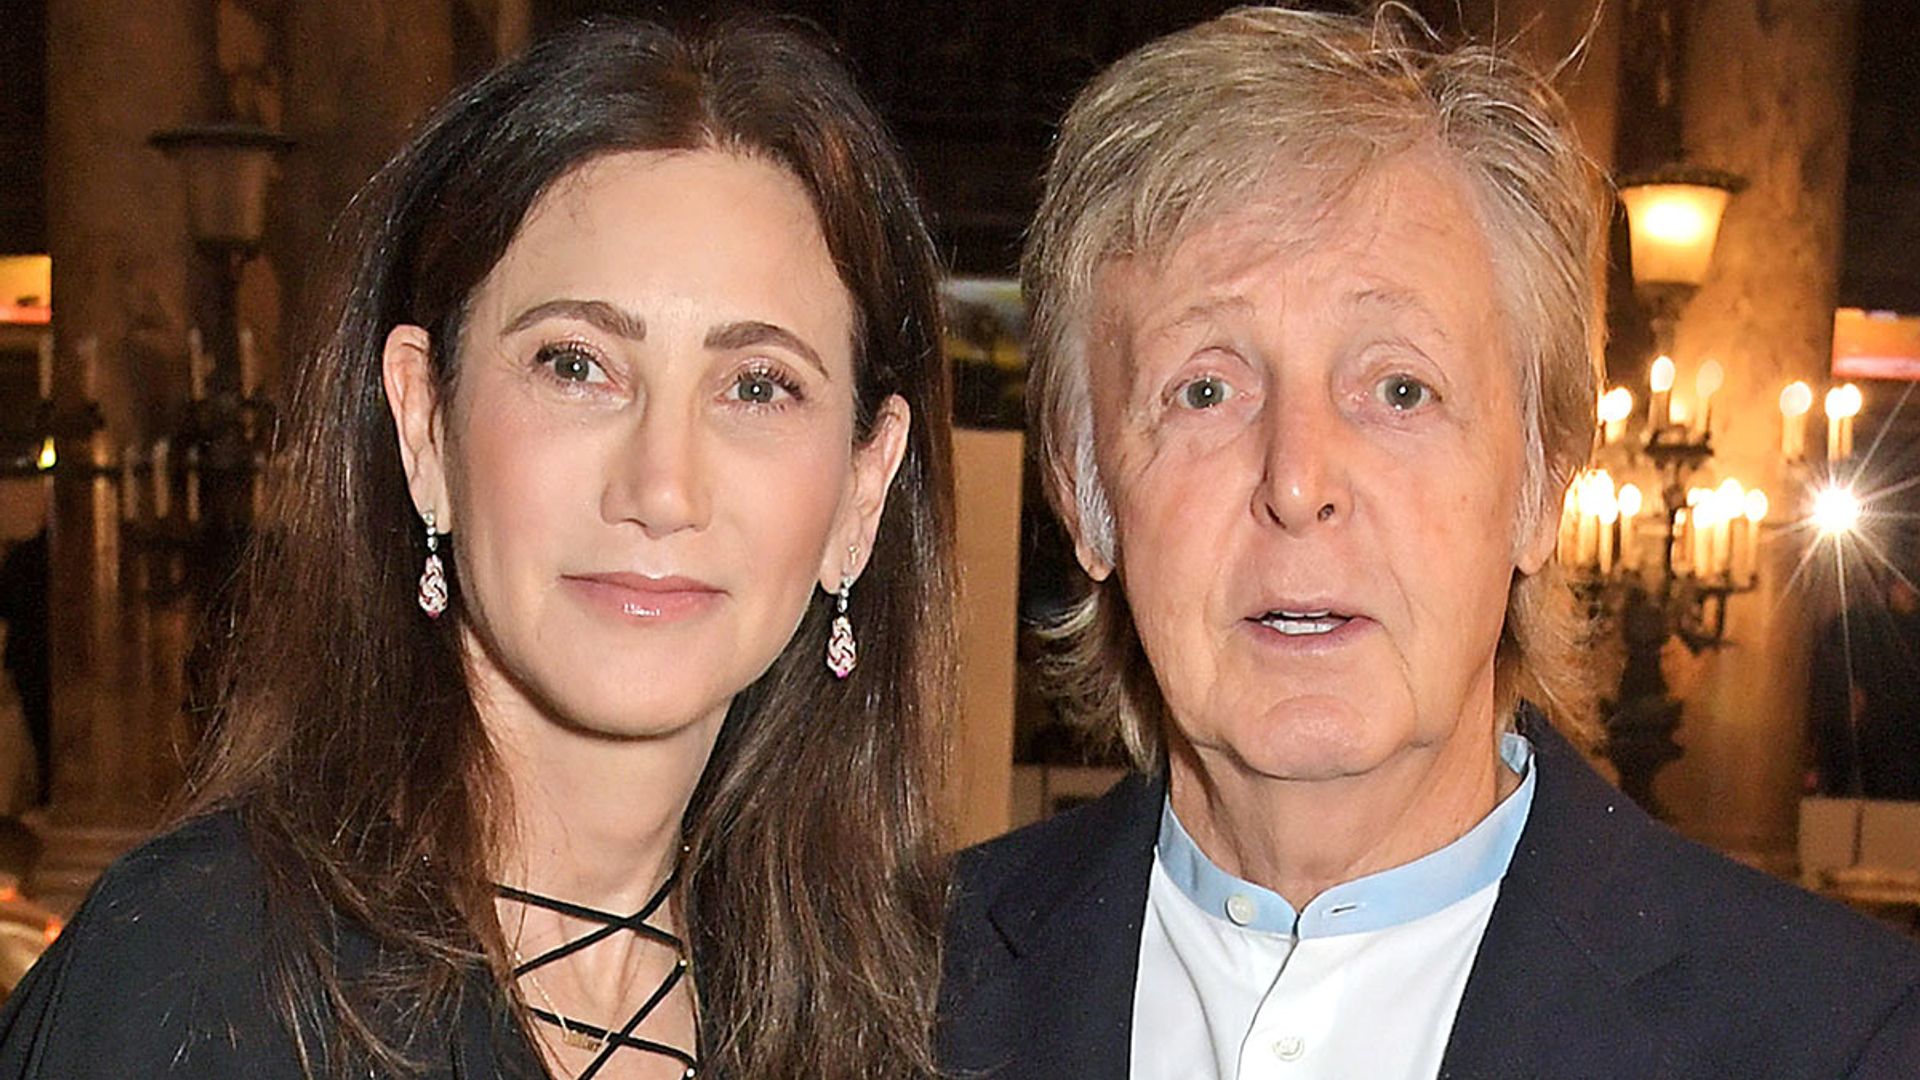 Paul McCartney's youthful new photo with wife Nancy Shevell sparks